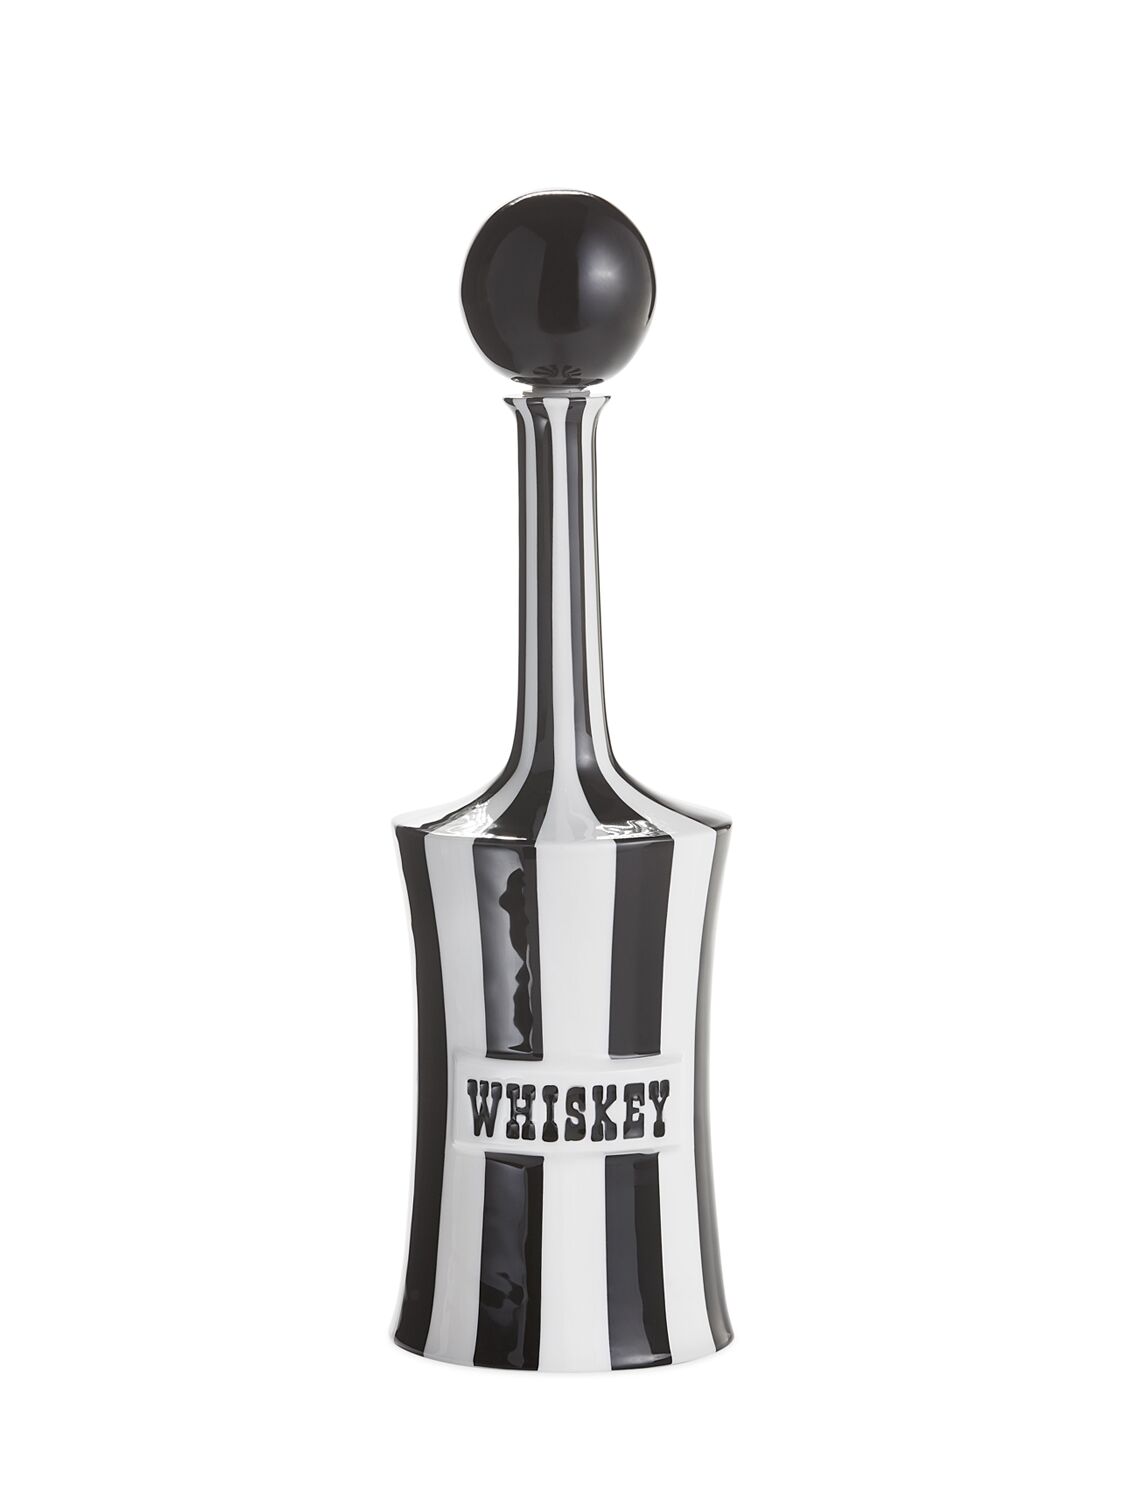 Image of Whiskey Vice Decanter